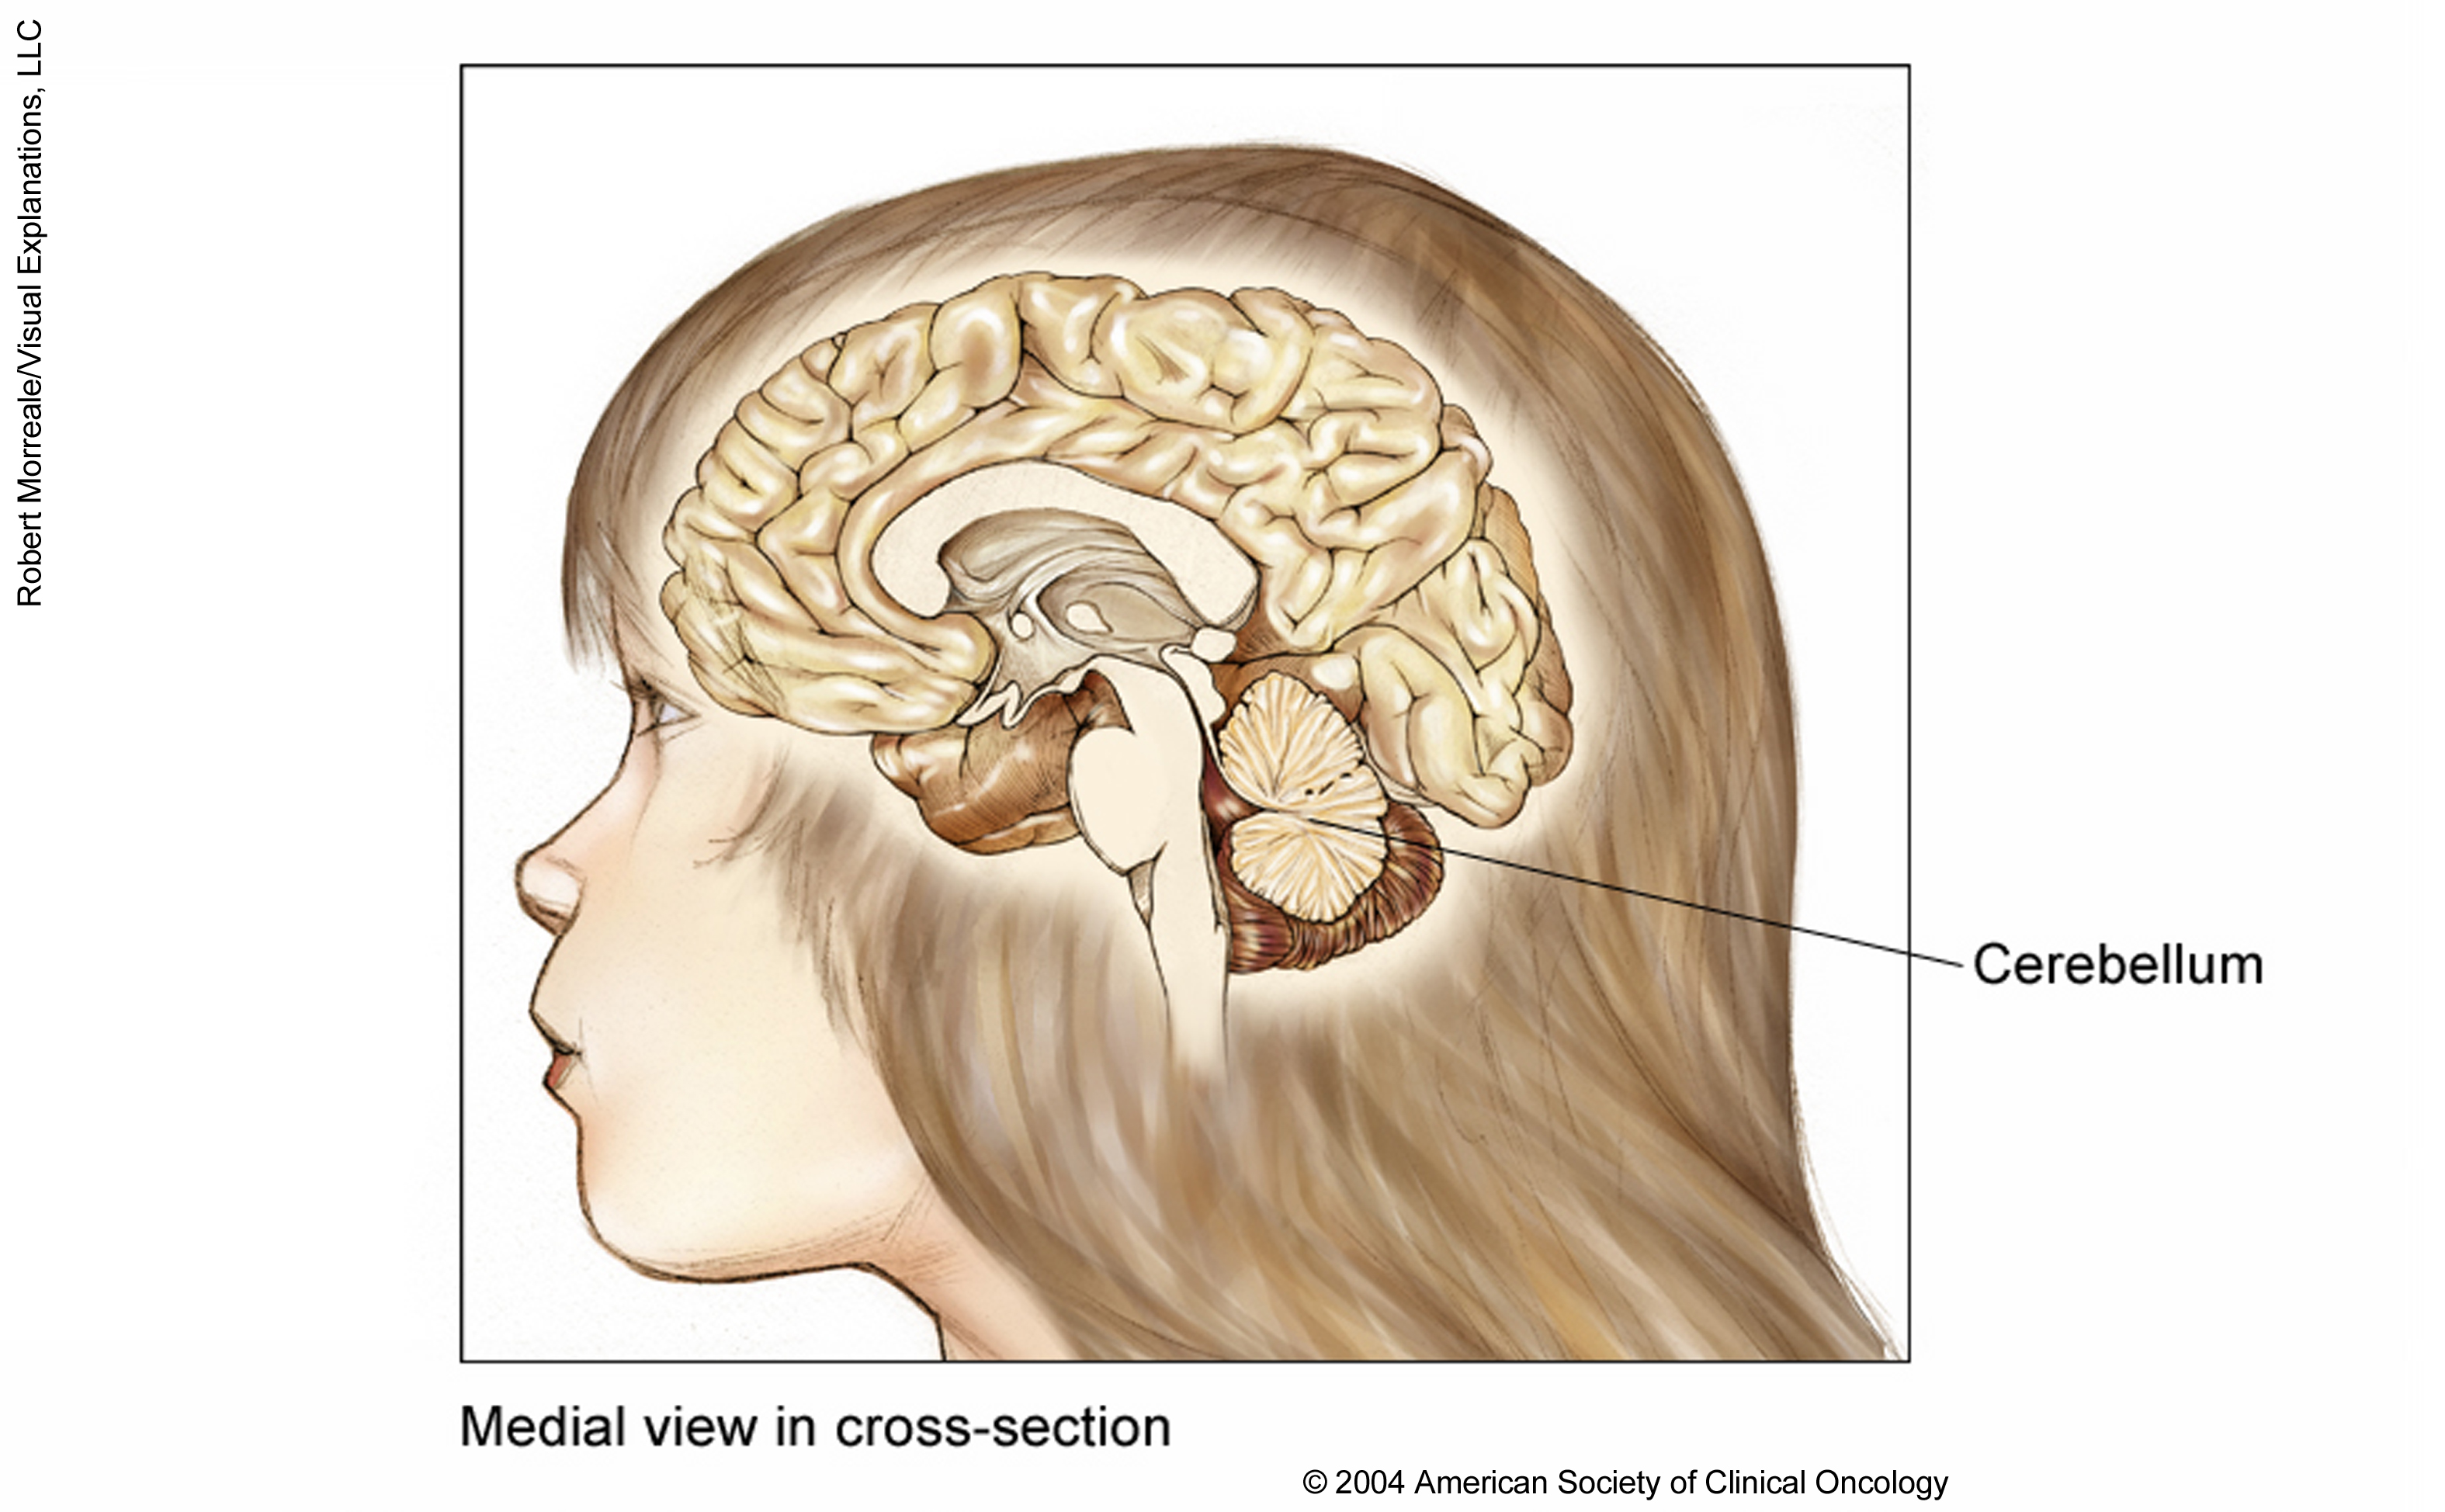 Medial view in cross-section of the brain of a child. See description for more information. 